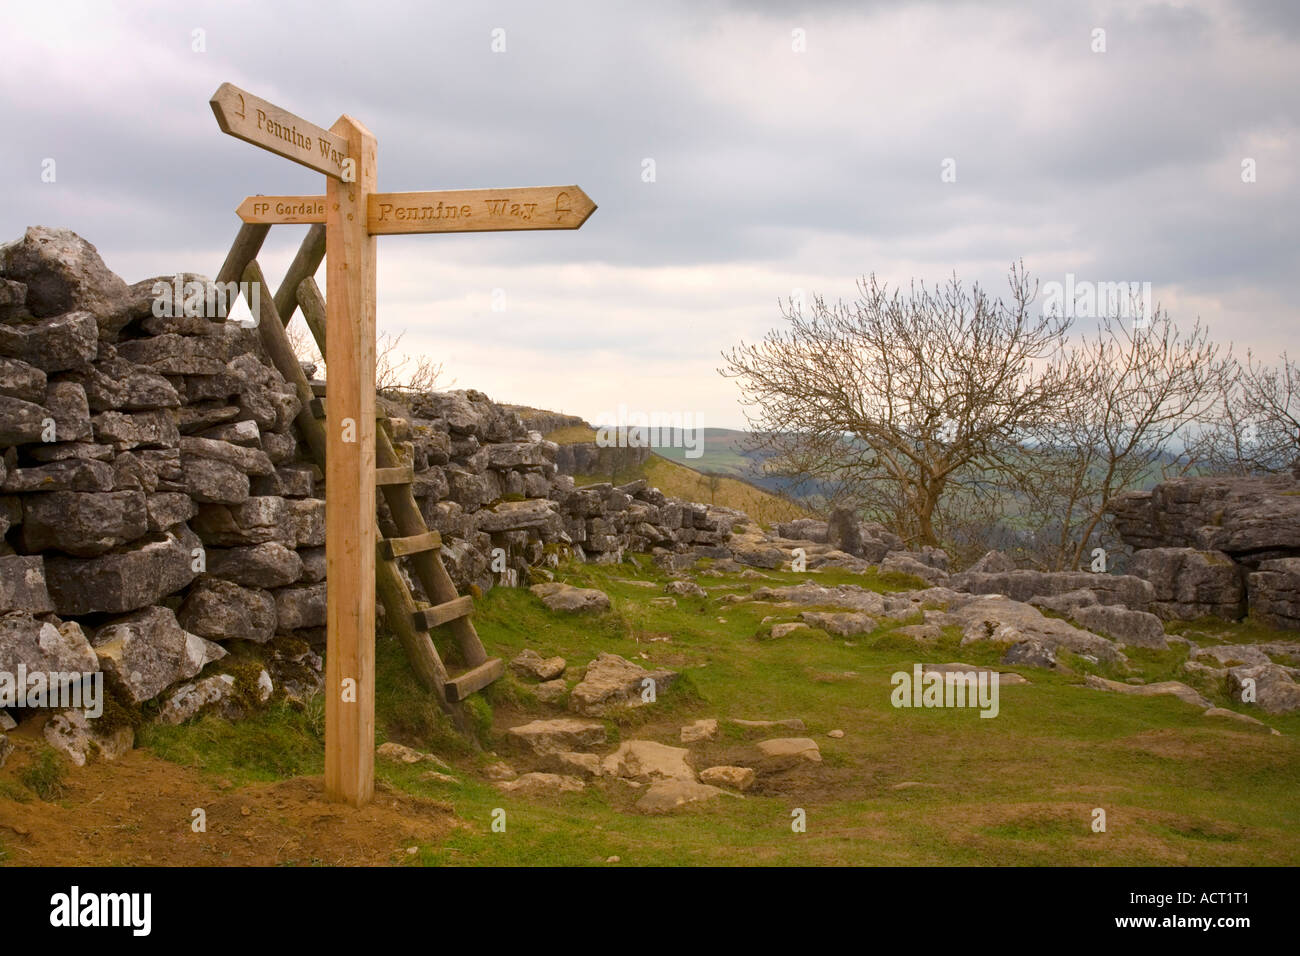 A new wooden sign on the Pennine Way in Yorkshire England at Malham Cove Hikers visible in the distance Stock Photo